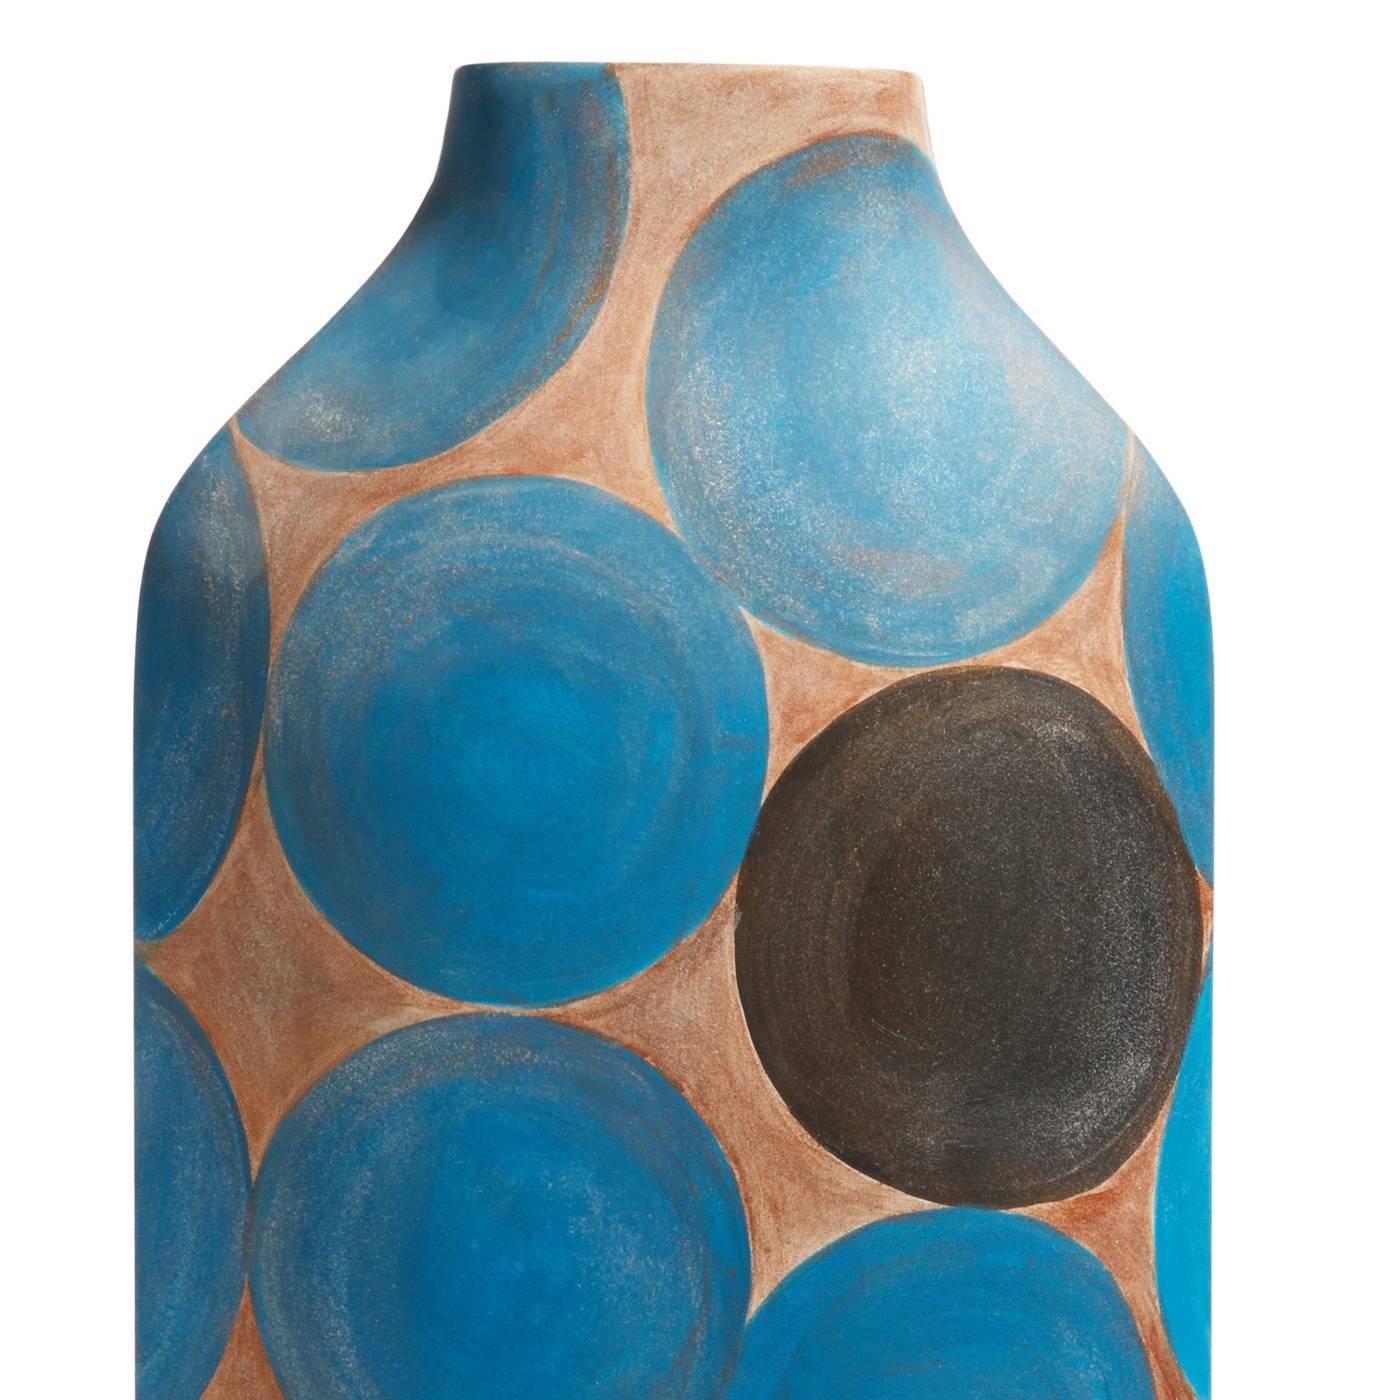 This striking vase was entirely decorated by hand and is part of a limited edition of 50 pieces designed by Rosaria Rattin. The simple, elongated lines of this vase are decorated with the use of blue and black large dots over a light brown